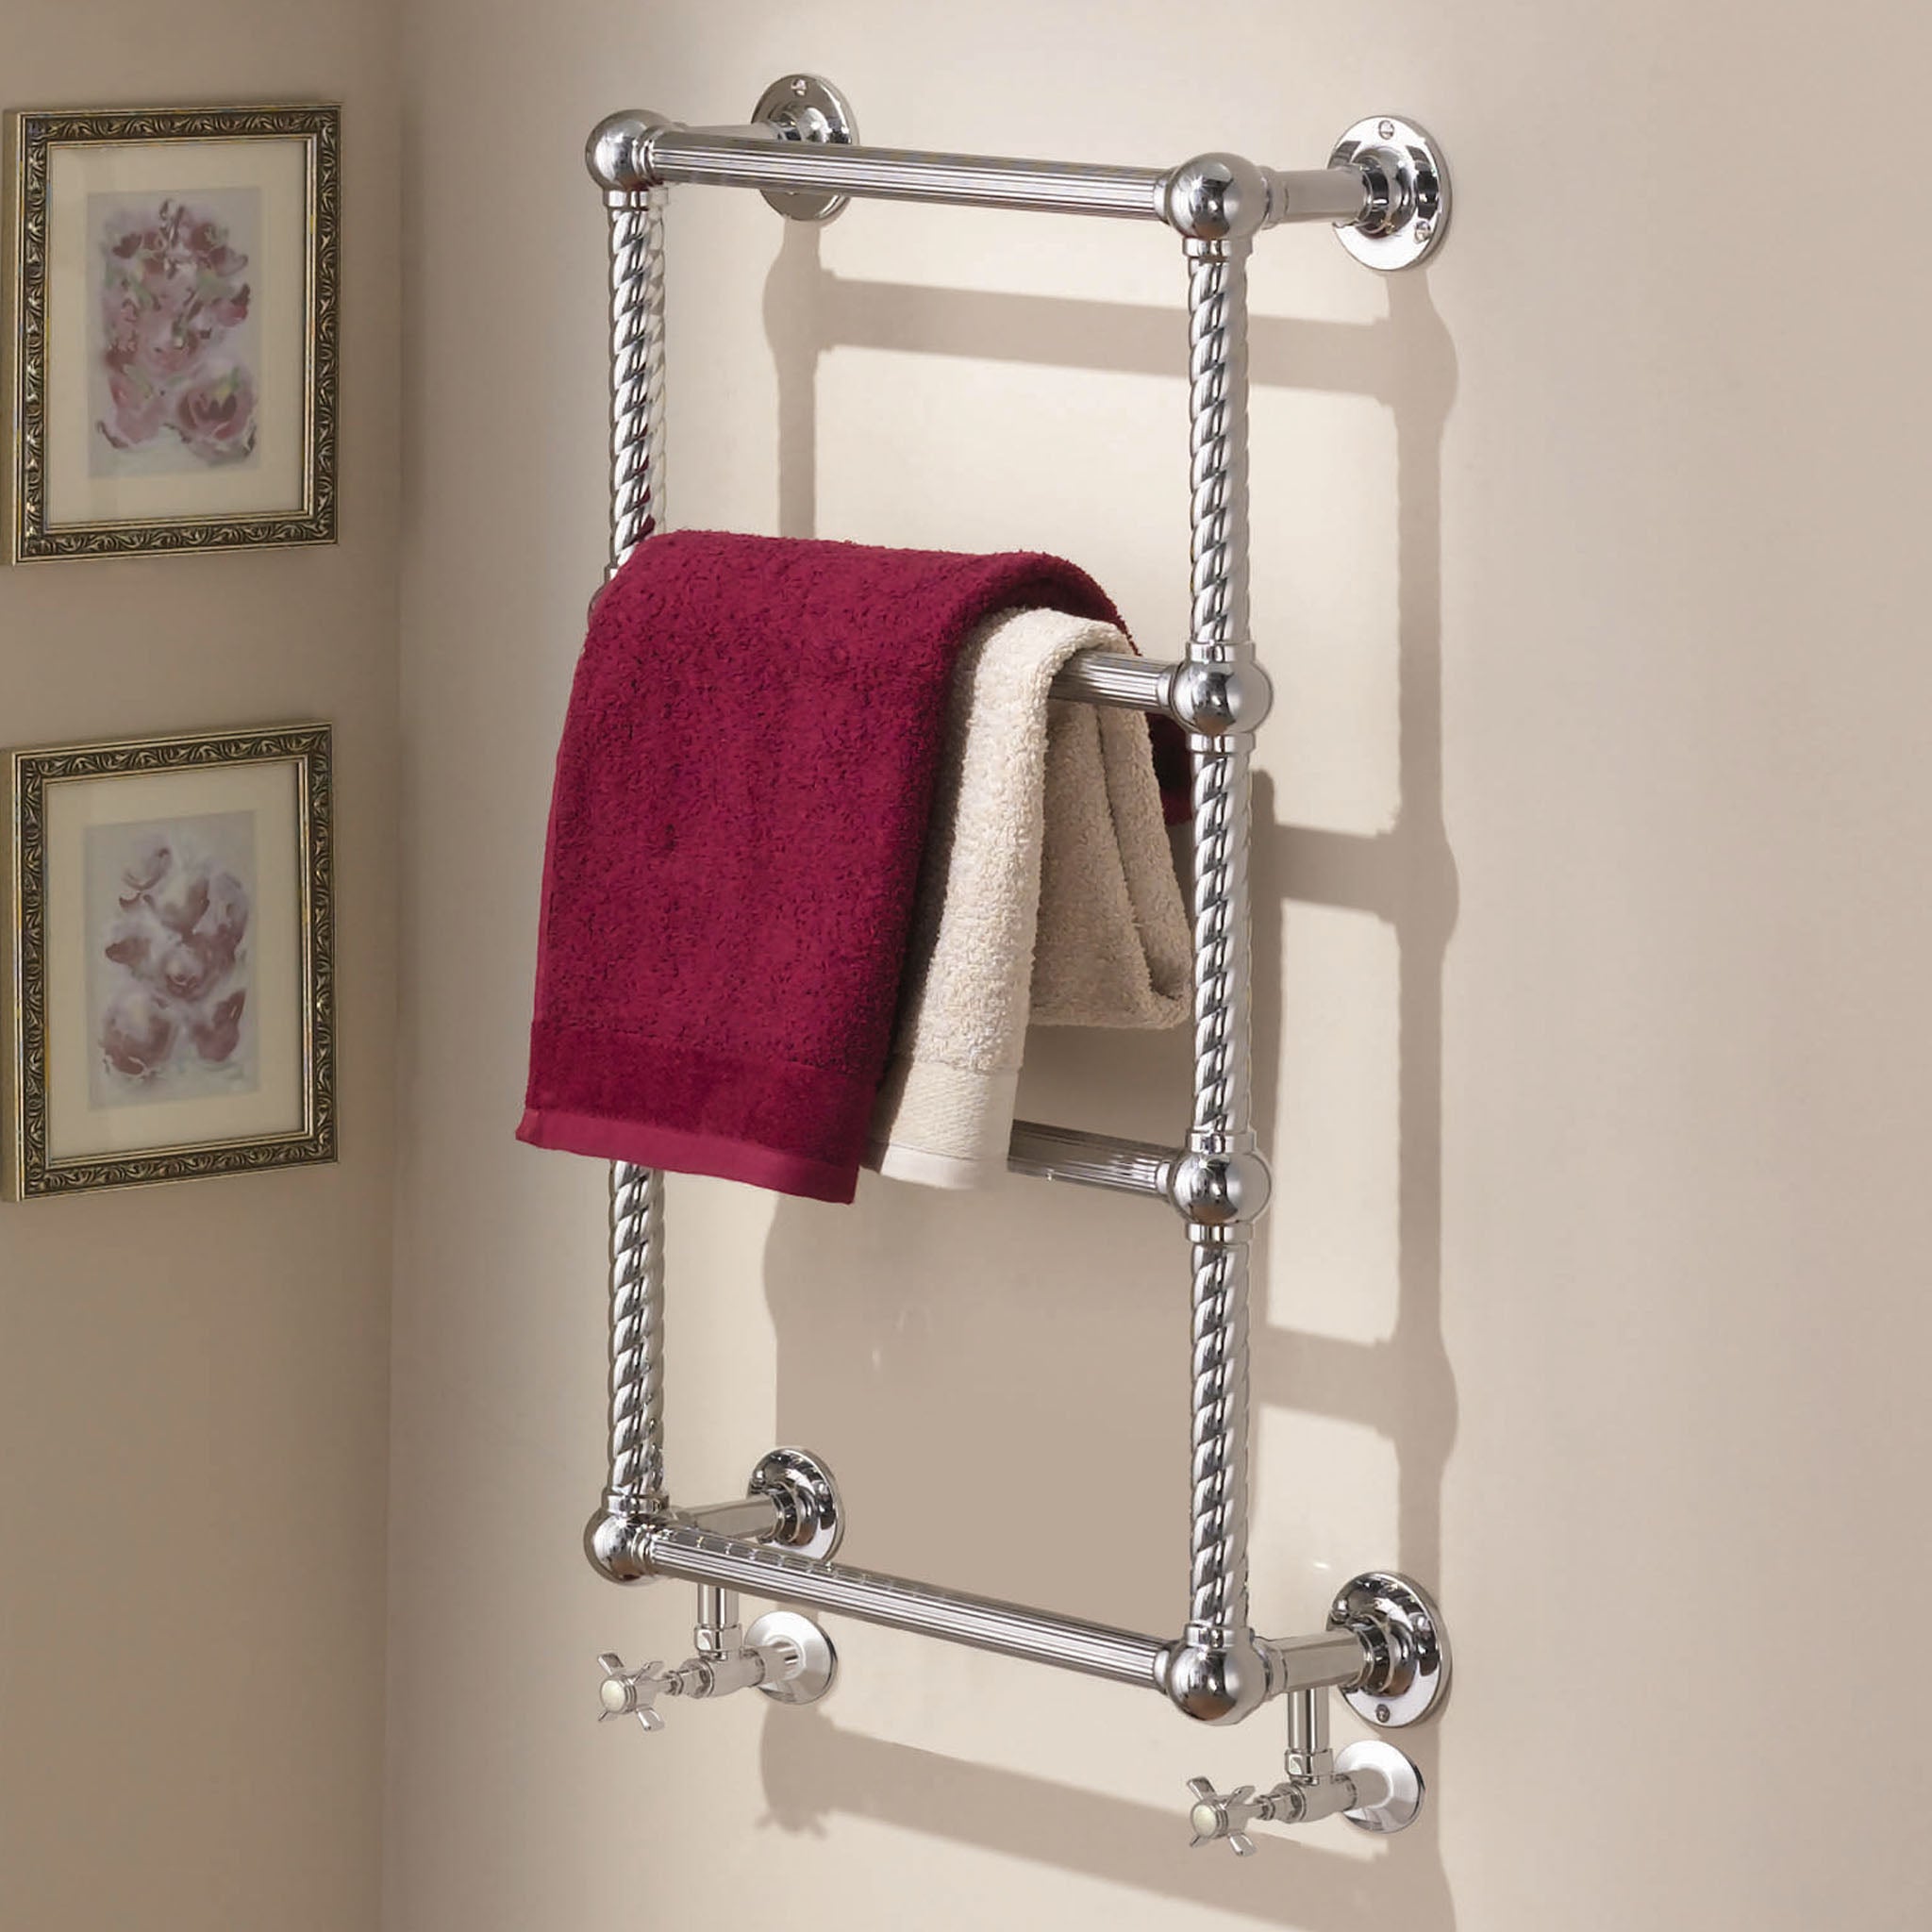 Vogue Colonnade IV Wall Mounted Heated Towel Rail